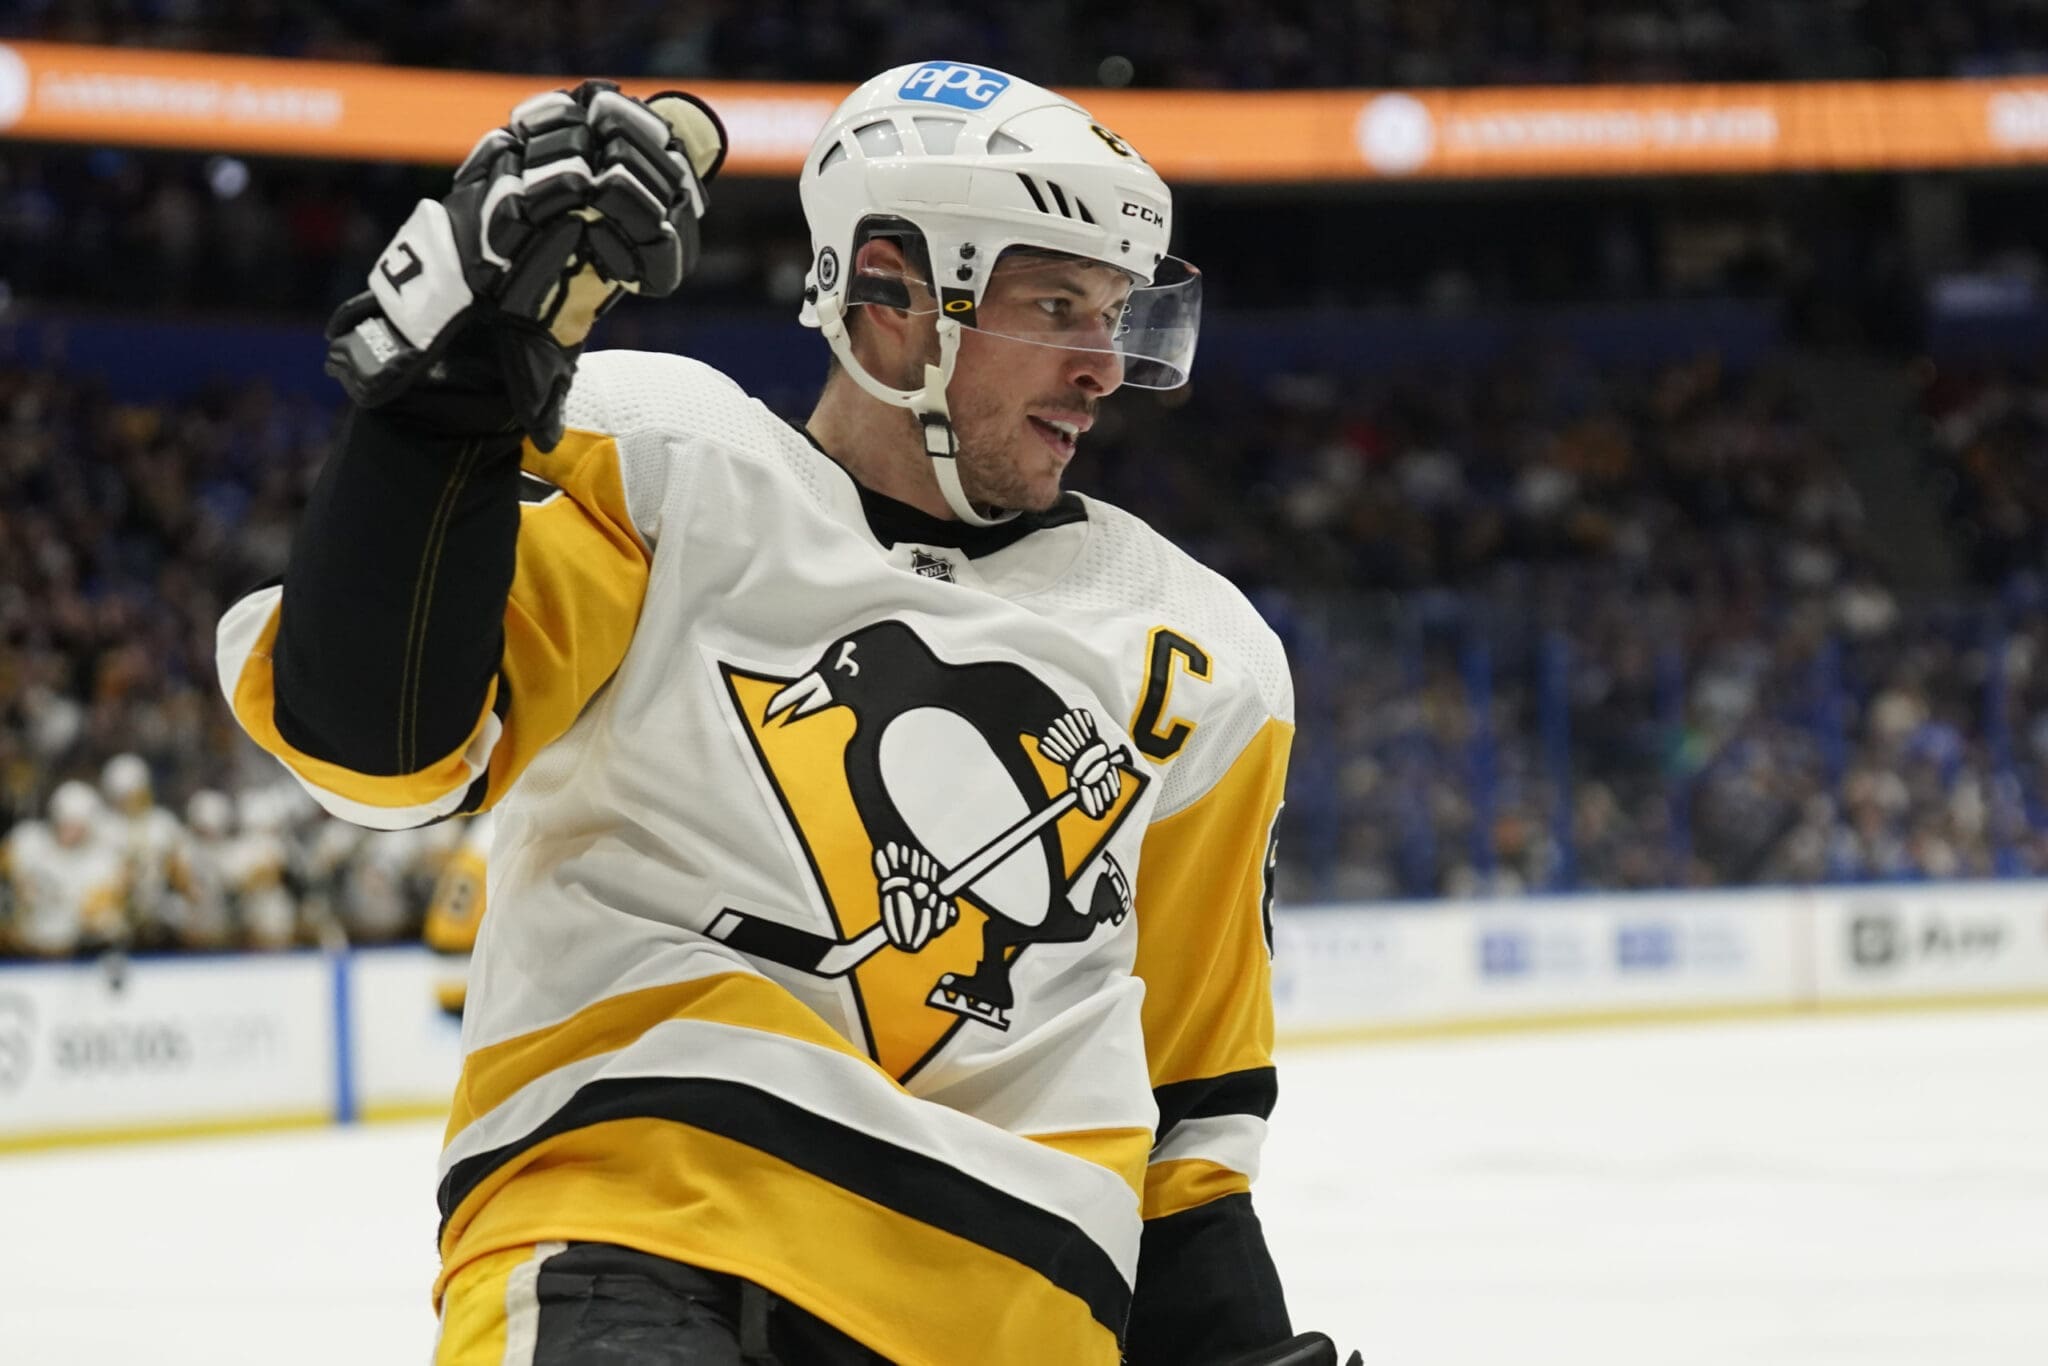 Penguins captain Sidney Crosby voted 'most complete player' in